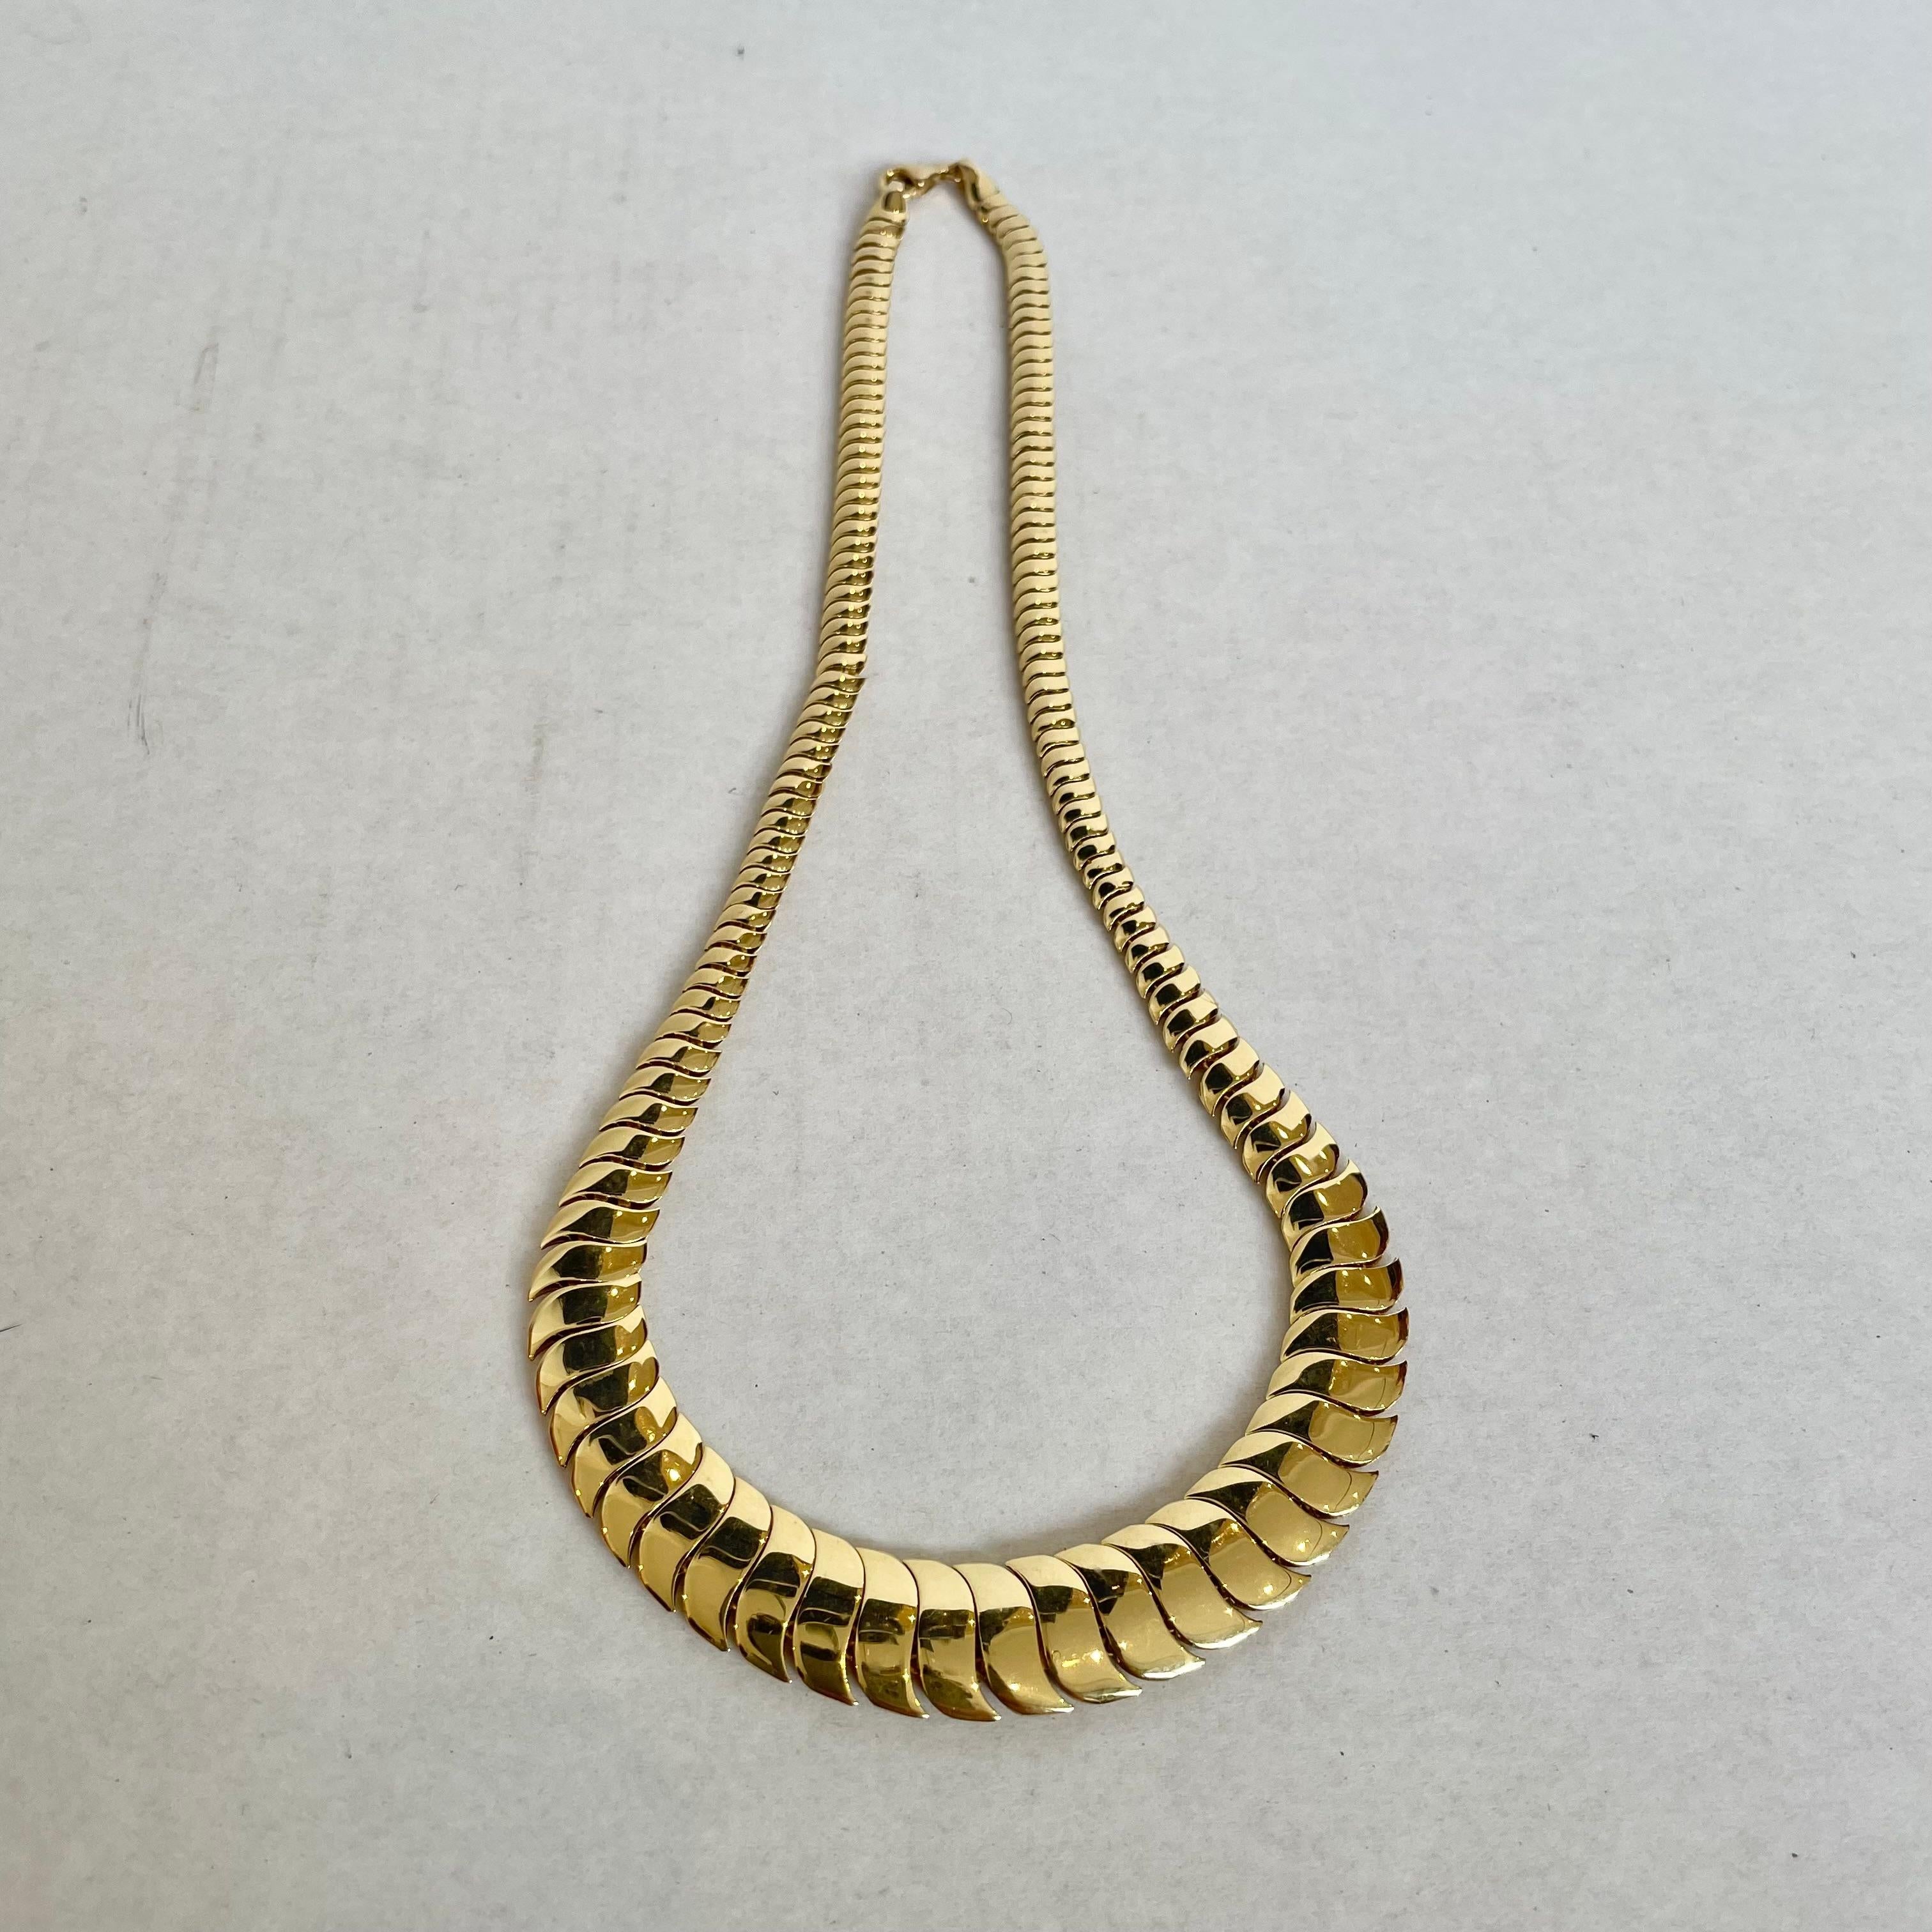 Stunning Roseark necklace with a flexible S link in 18k gold. Simple and elegant design. Lays flat on chest giving it a beautiful presentation. The links start smaller towards the clasp and gradually grow larger towards the center of the chain. Good